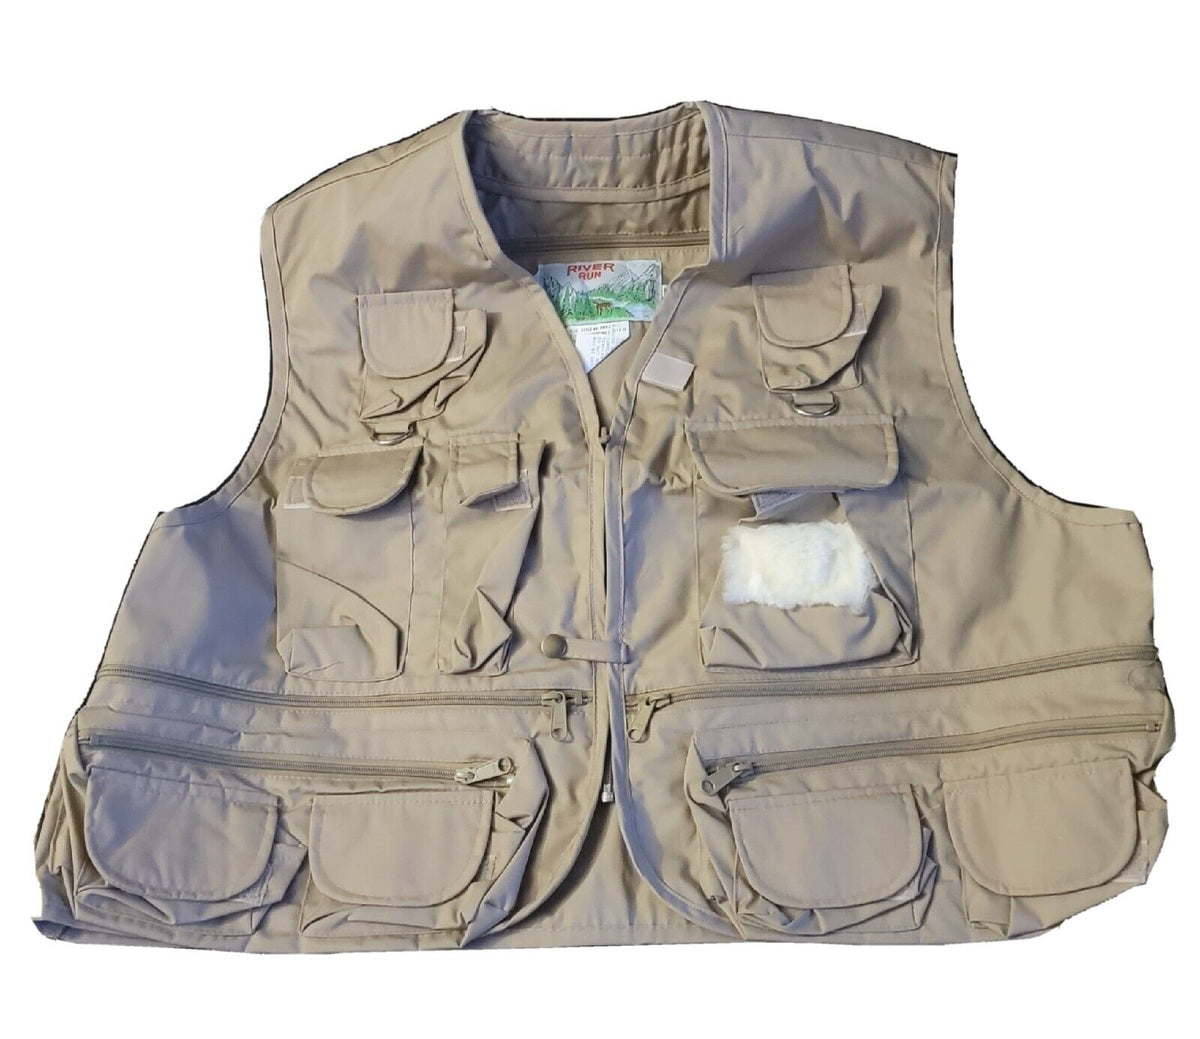 River Run Fishing Vest, XXL, Brown Yellowstone Style # R WH-2, NEW